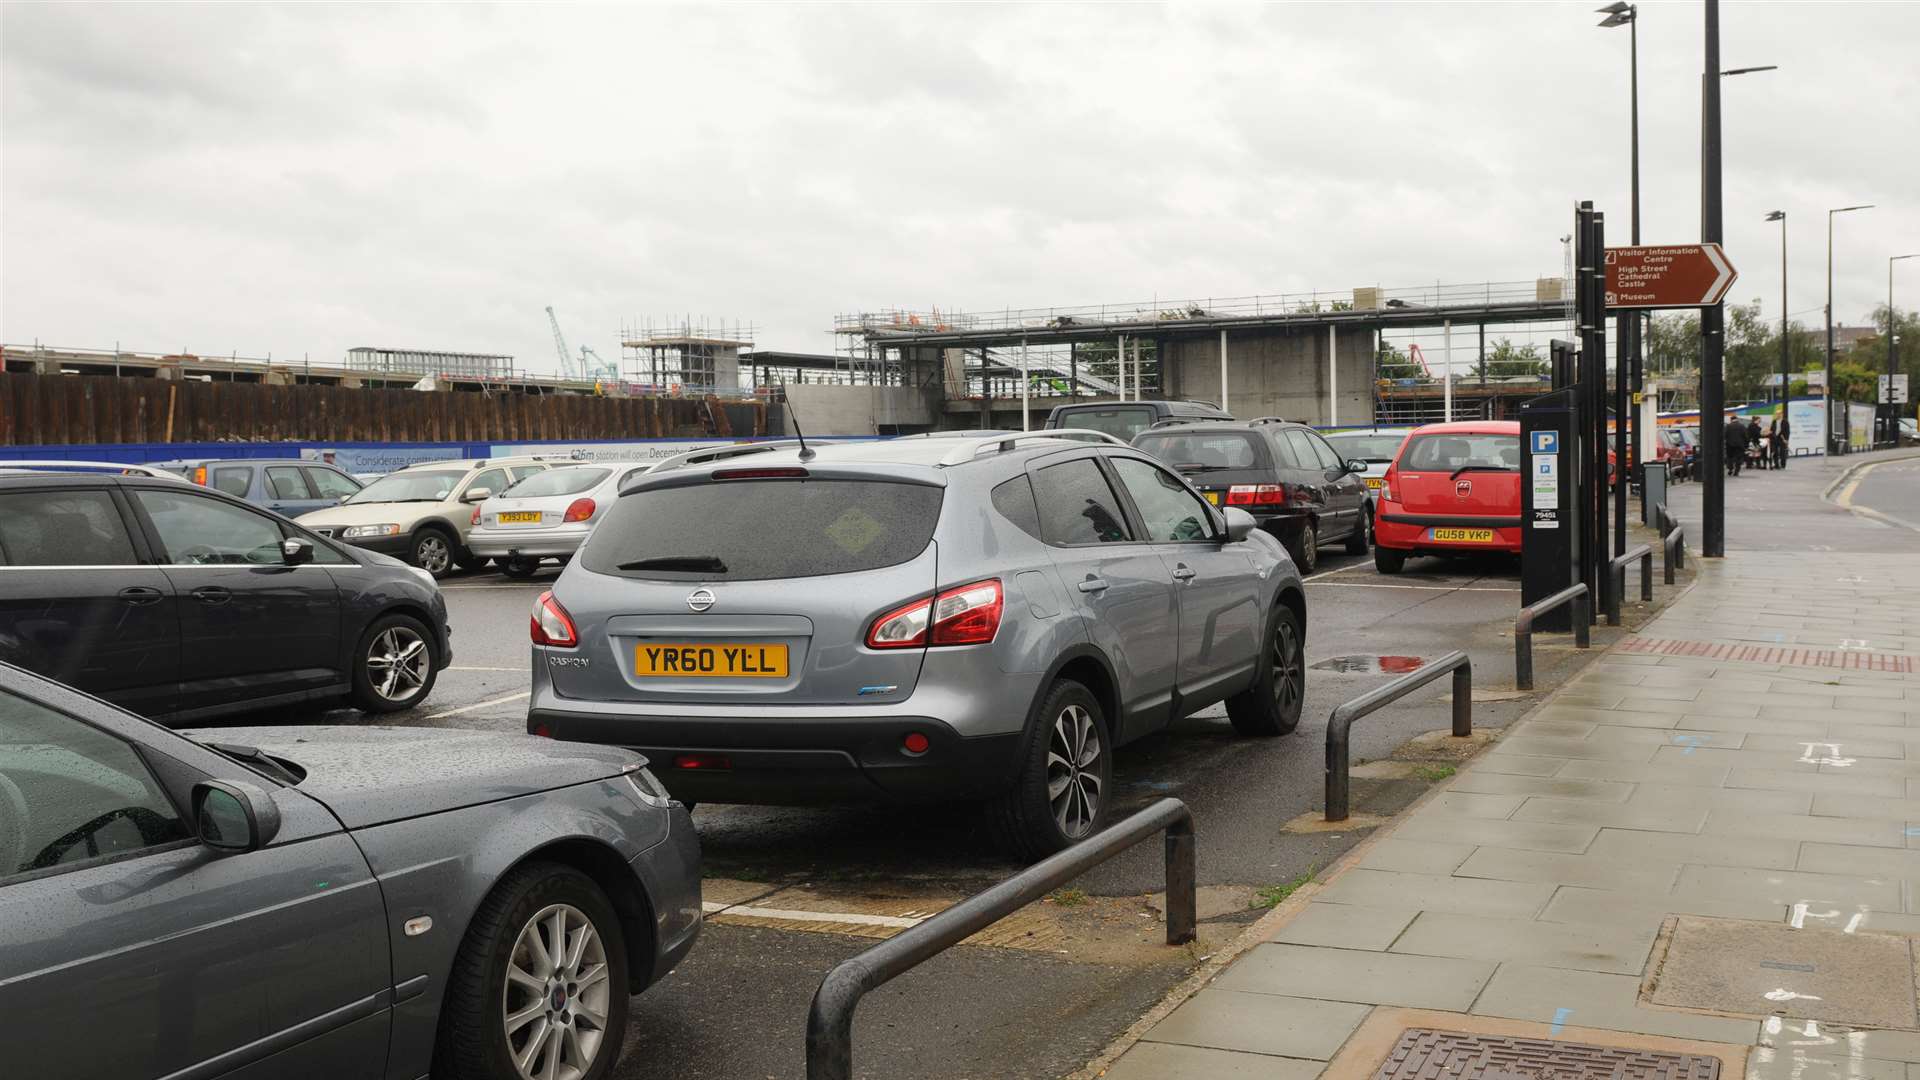 Ongoing building work for the new railway station means the car park has to close.